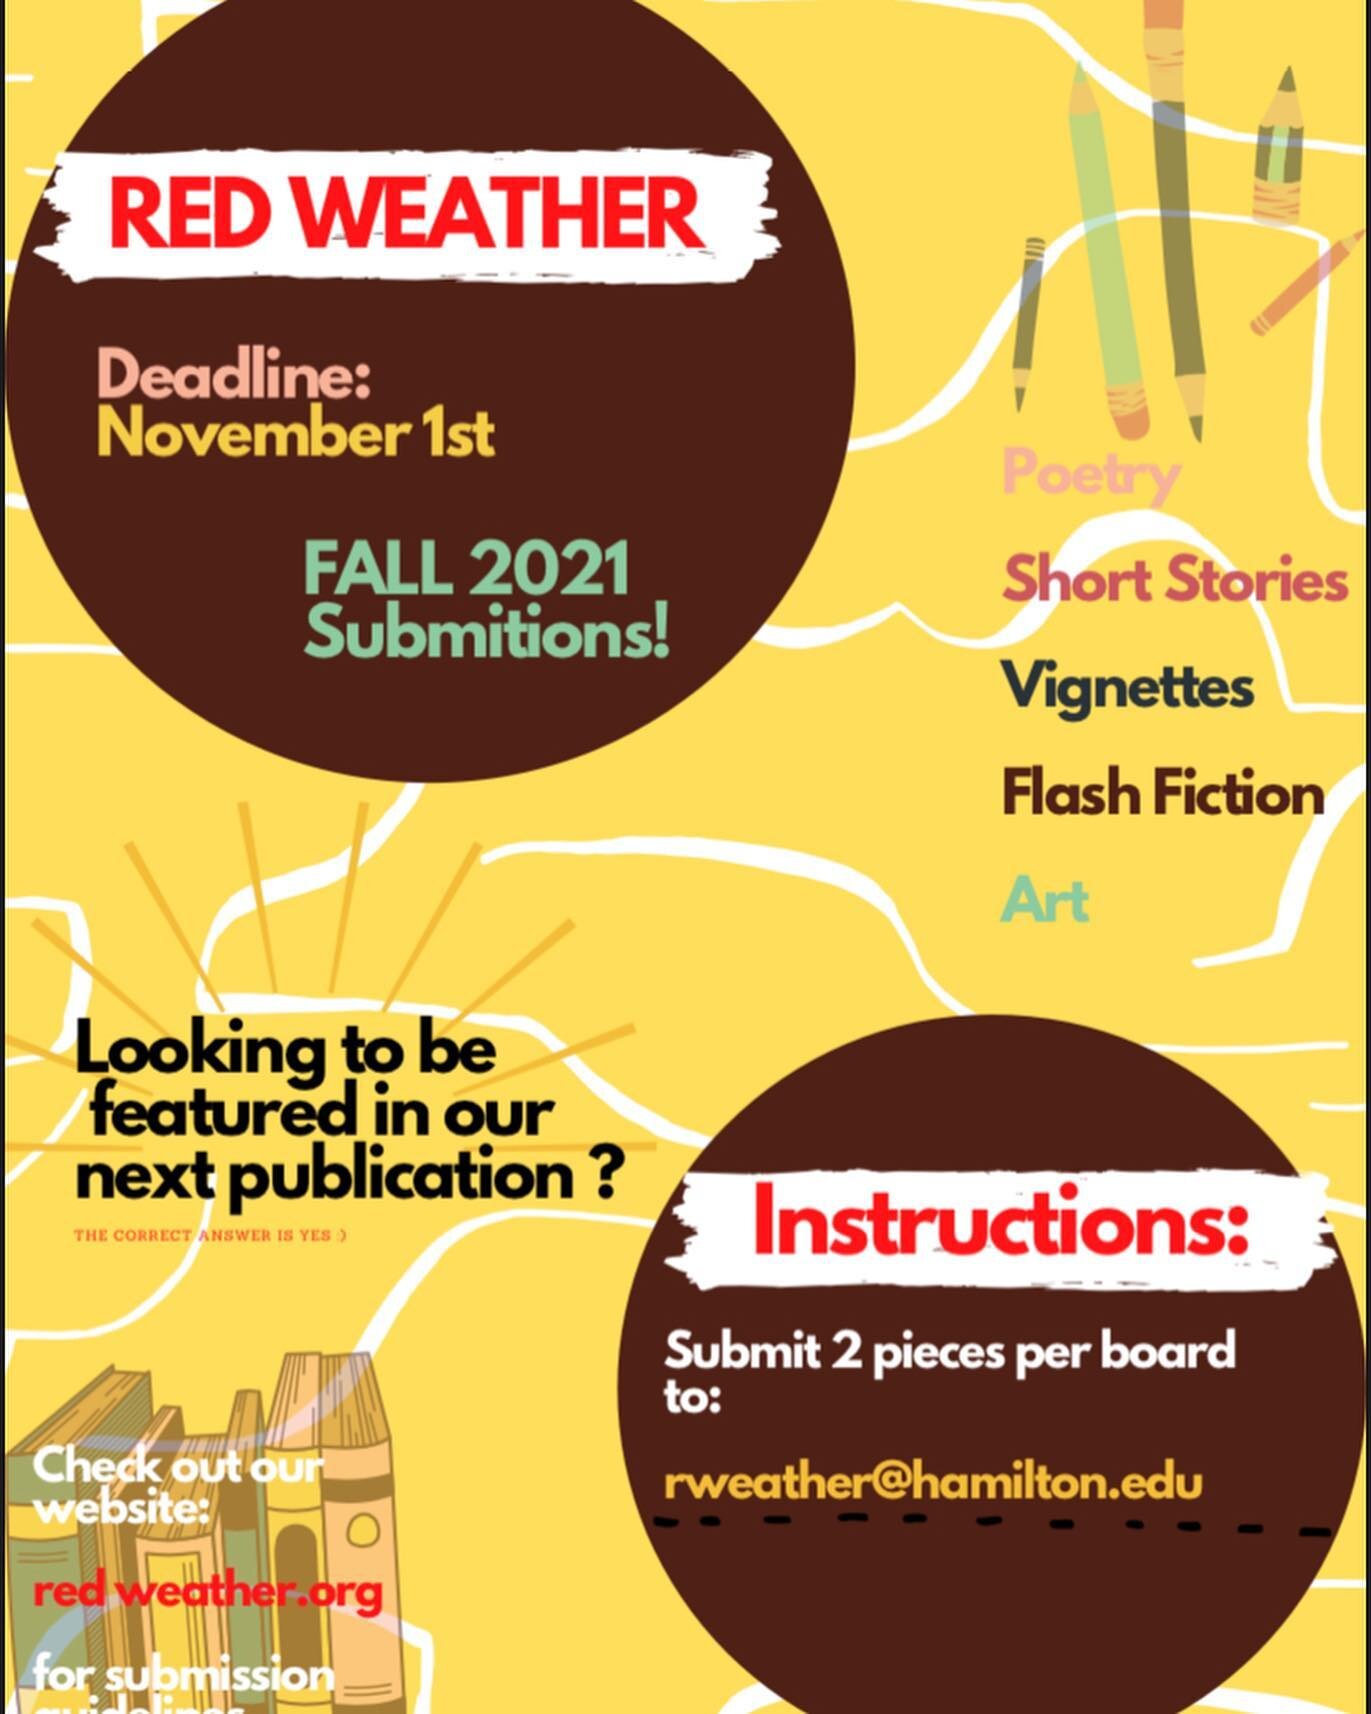 Our next publication is going to be so great that we just had to make two posters. Check out our website for submission details!! We can&rsquo;t wait to see your work :)